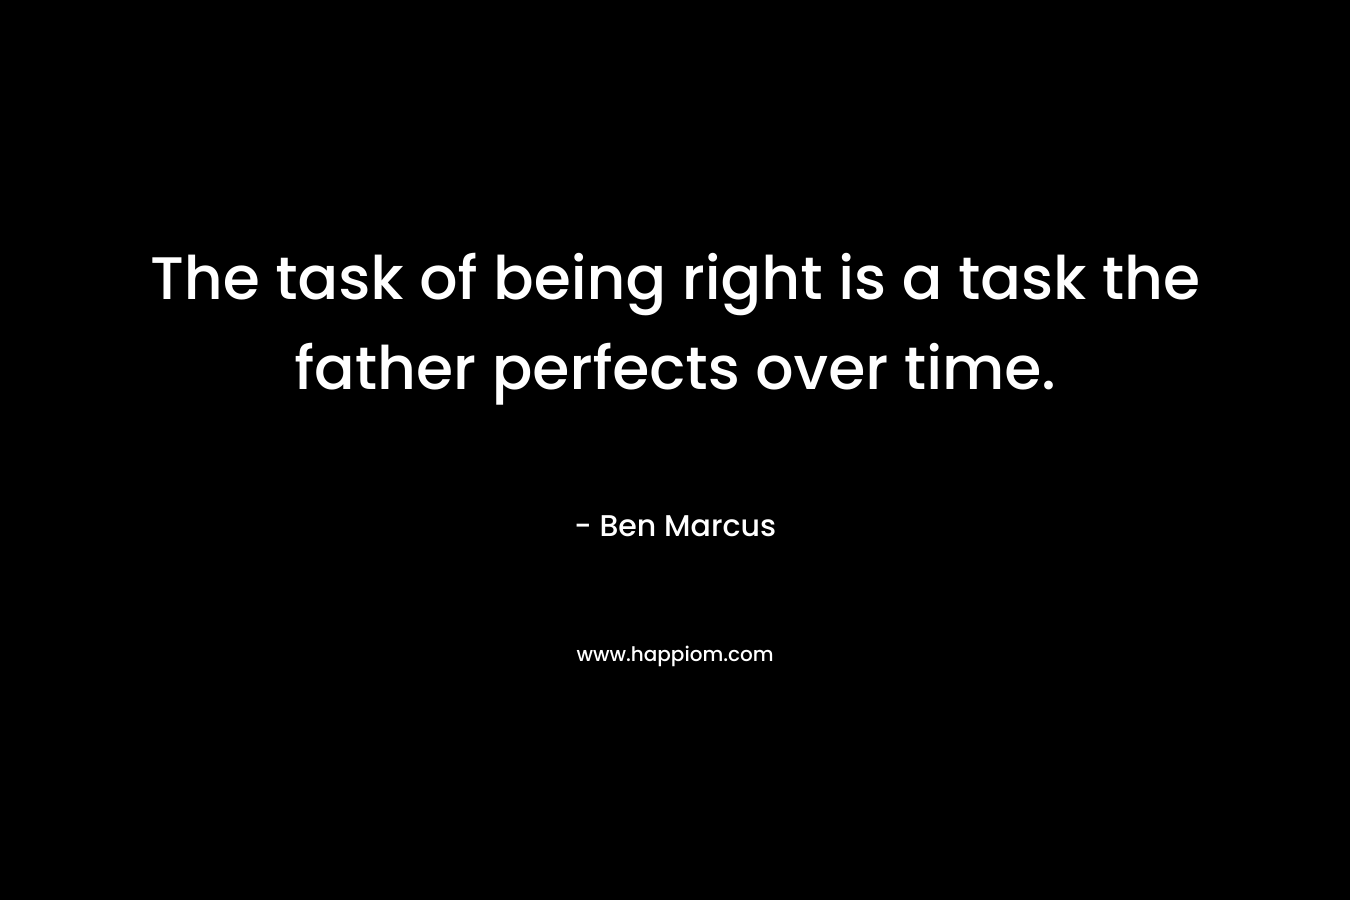 The task of being right is a task the father perfects over time. – Ben Marcus